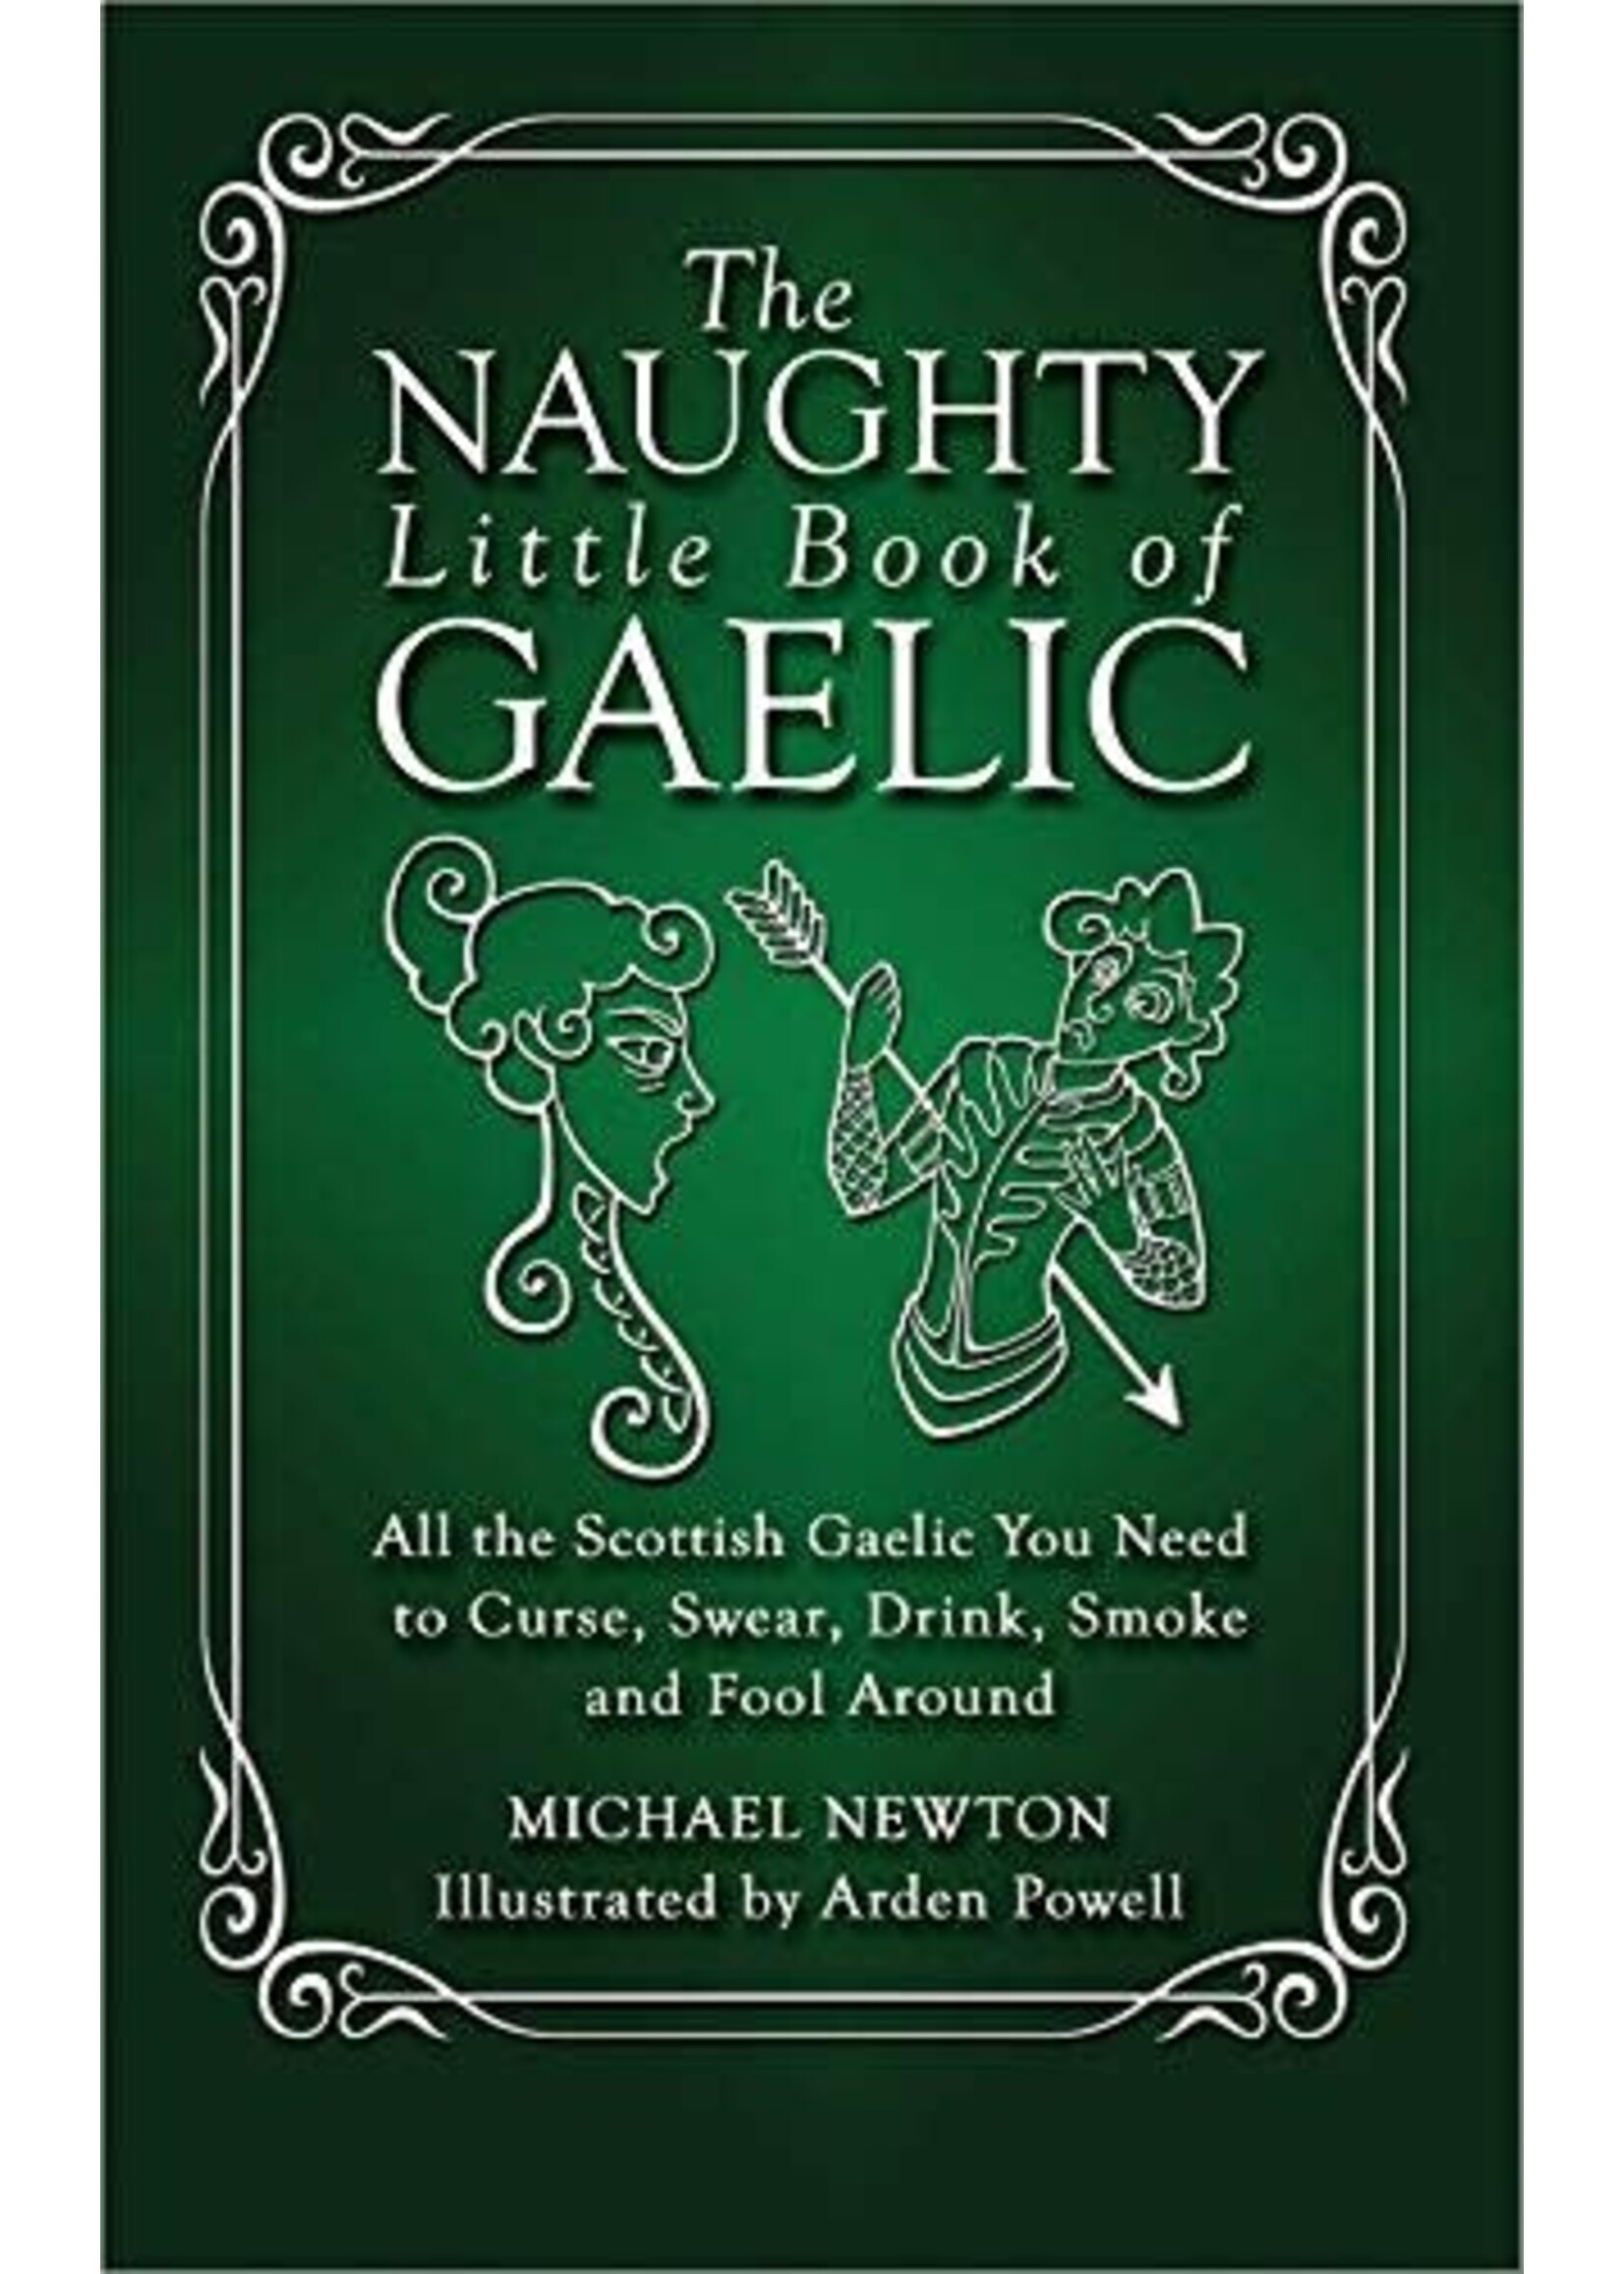 The Naughty Little Book of Gaelic: All the Scottish Gaelic You Need to Curse, Swear, Drink, Smoke, and Fool Around by Michael Newton, Arden Powell